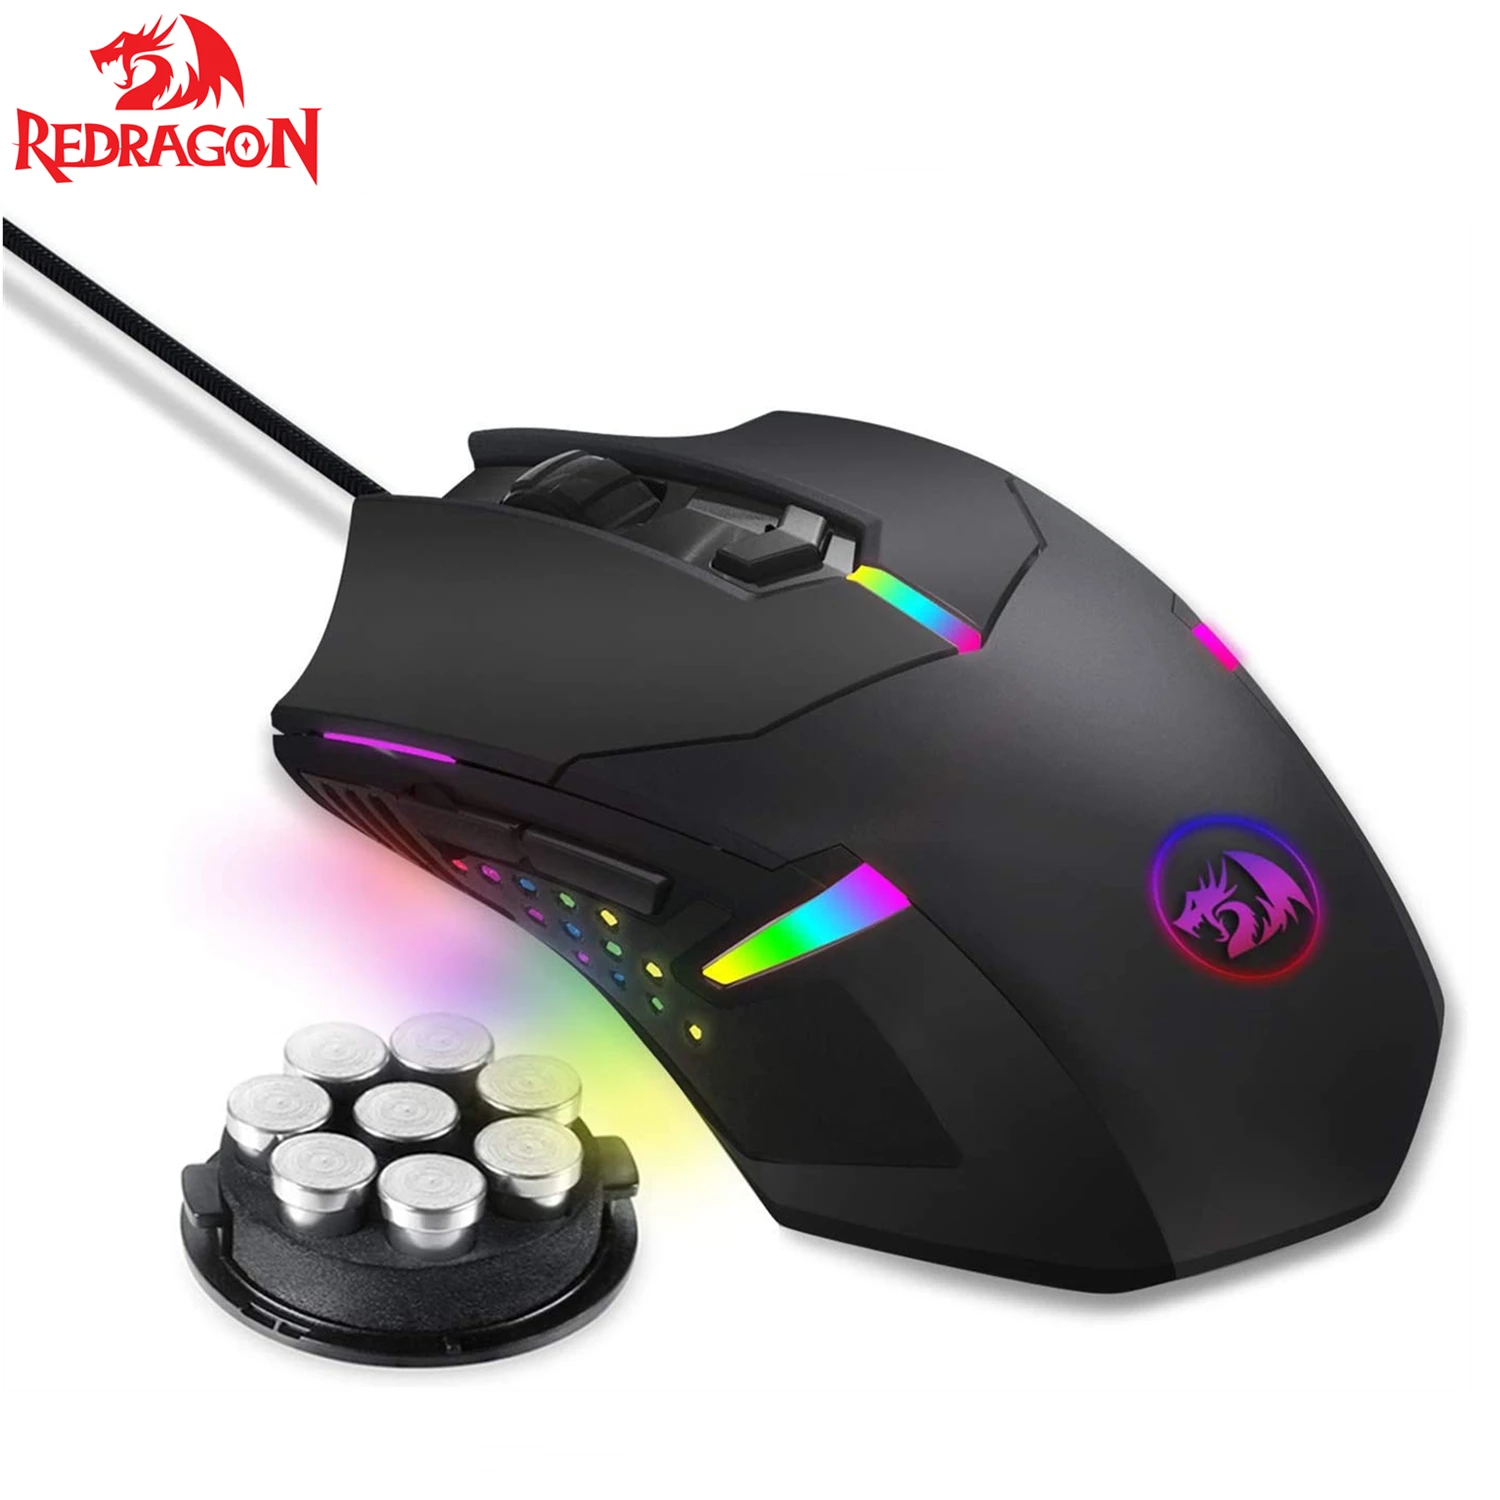 

Redragon M601 Gaming Mouse RGB Backlit Wired 7 Button Programmable Mouse Macro Recording Weight Tuning Set 7200 DPI for Windows